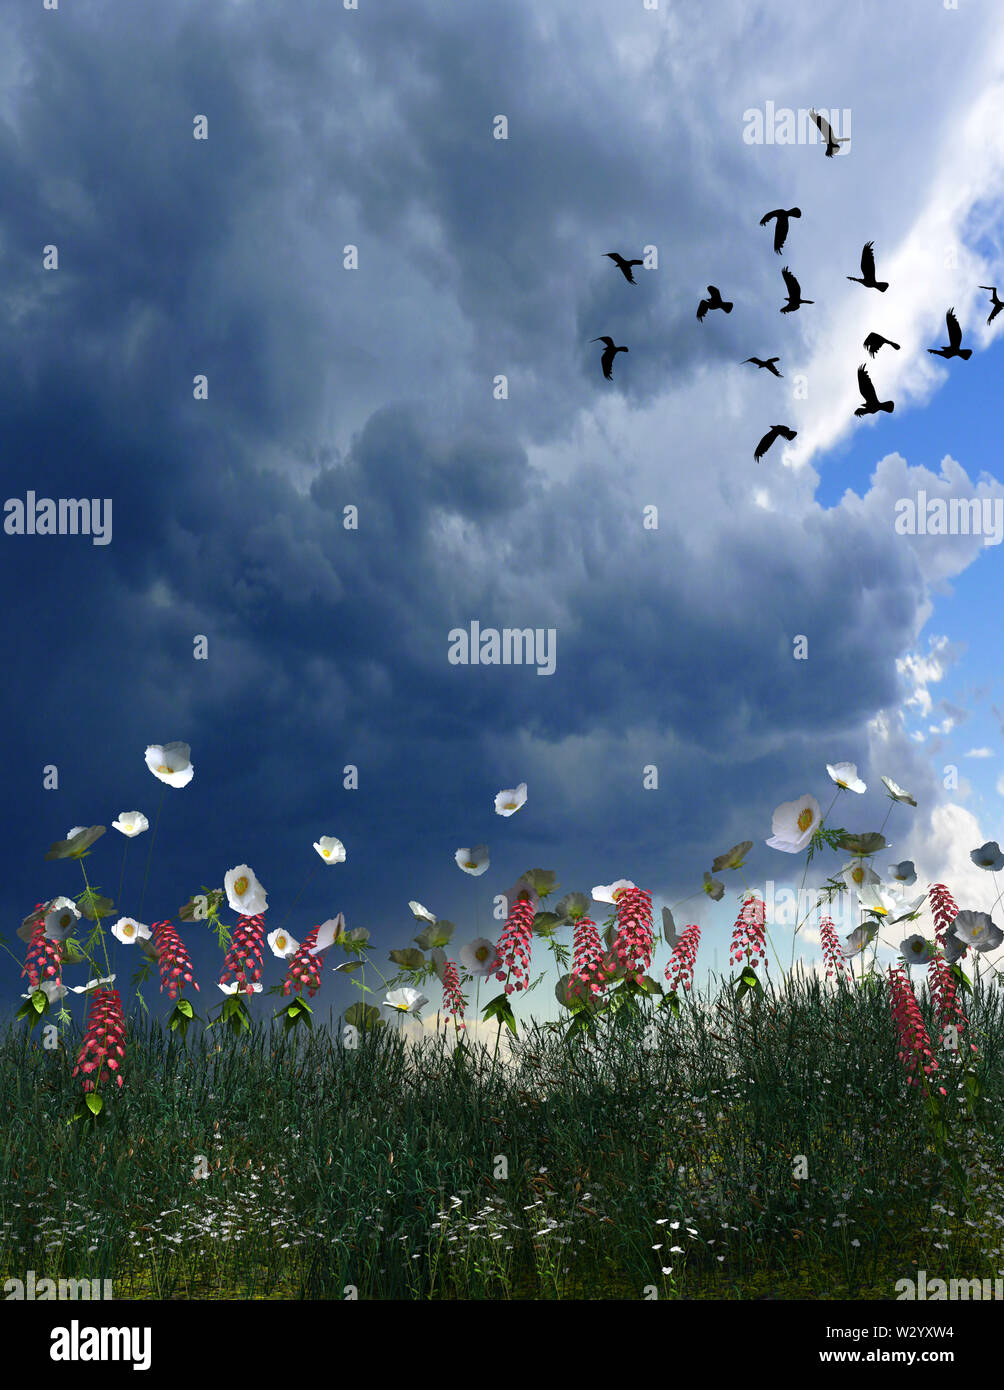 illustration of a field with wildflowers and a large expanse of cloudy sky with crows in the distance. Stock Photo